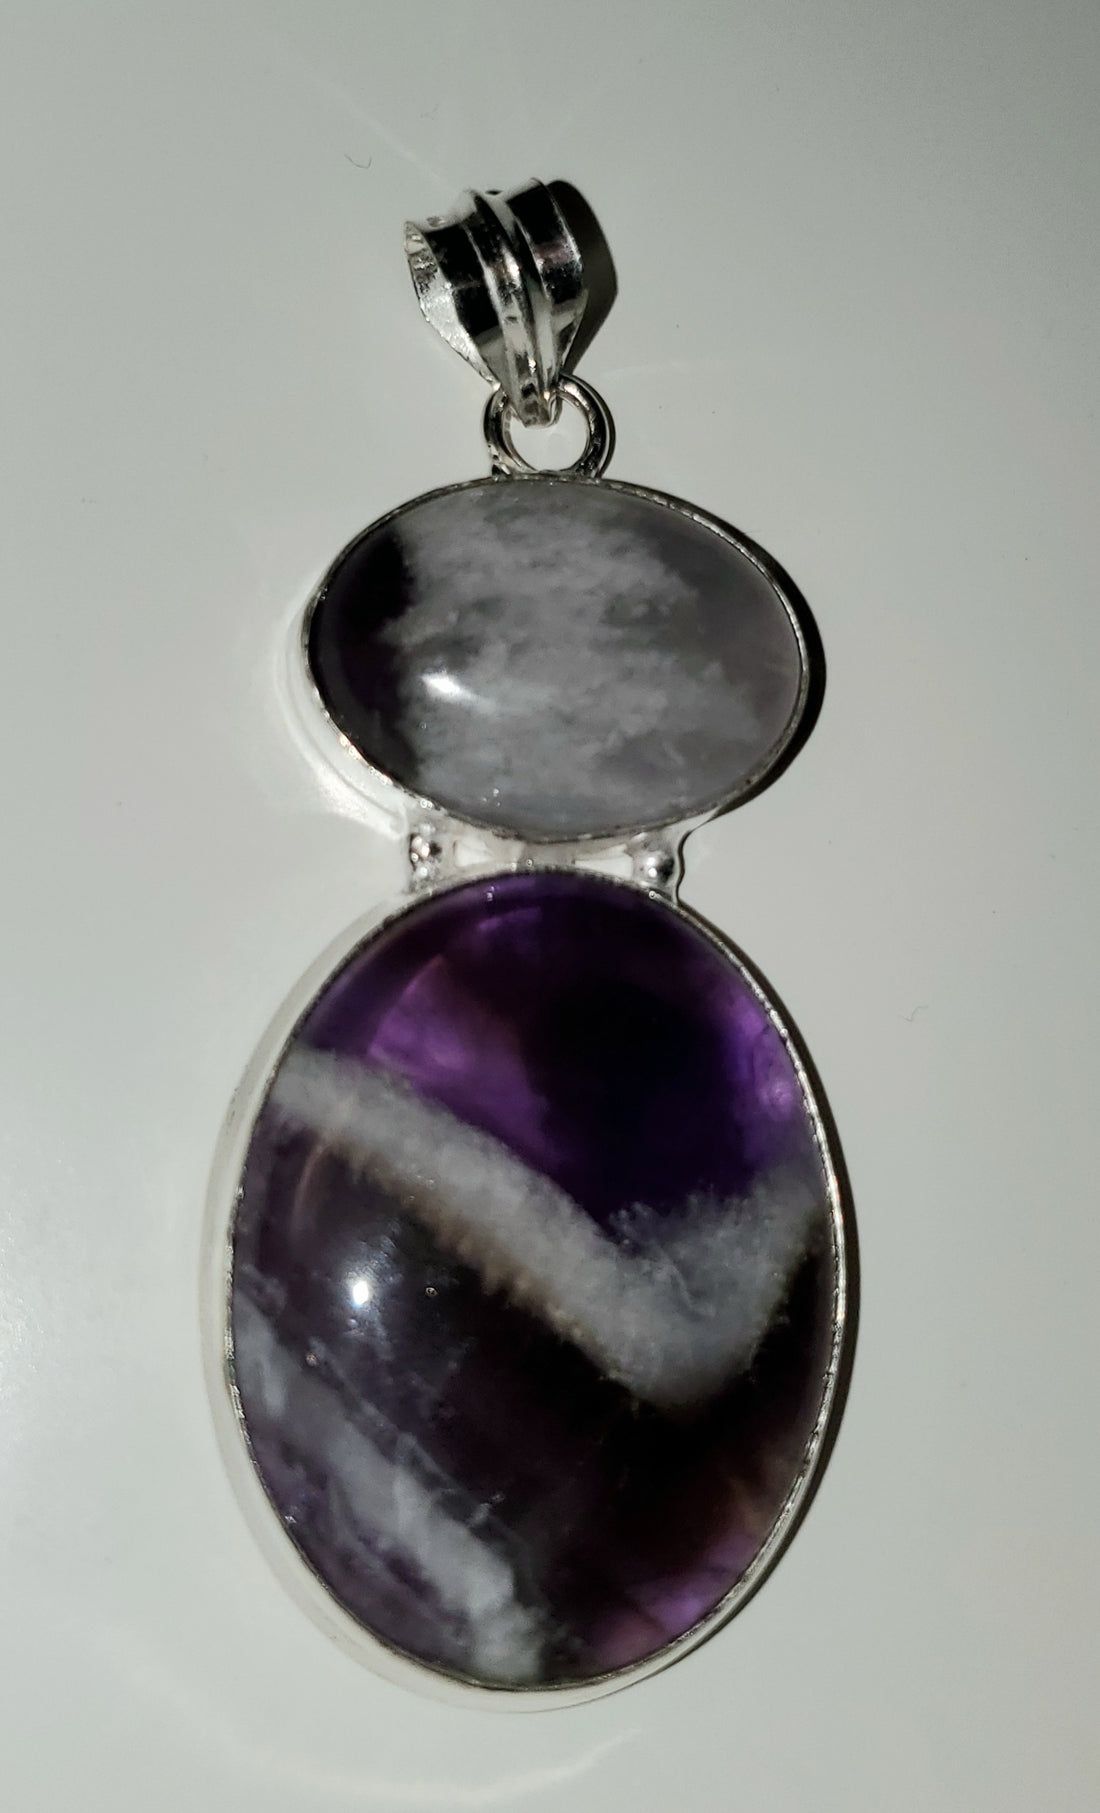 Chevron Amethyst 2" Pendant on cord and Gift-Boxed